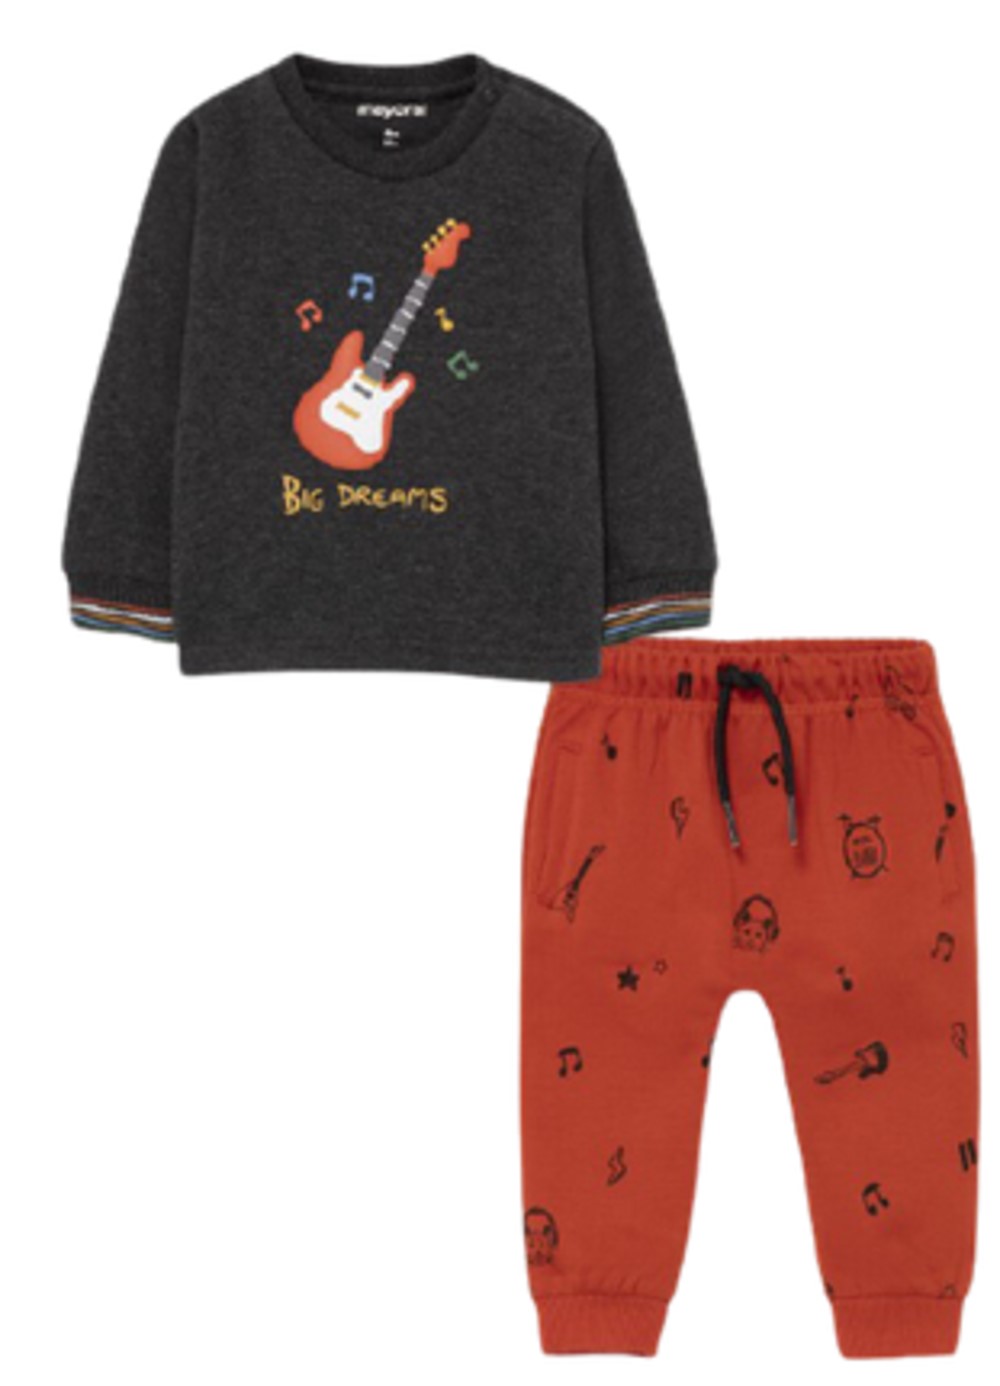 MAYORAL BABY BOYS FALL OUTFIT PANTS AND TOP SET (GUITAR DREAMS)